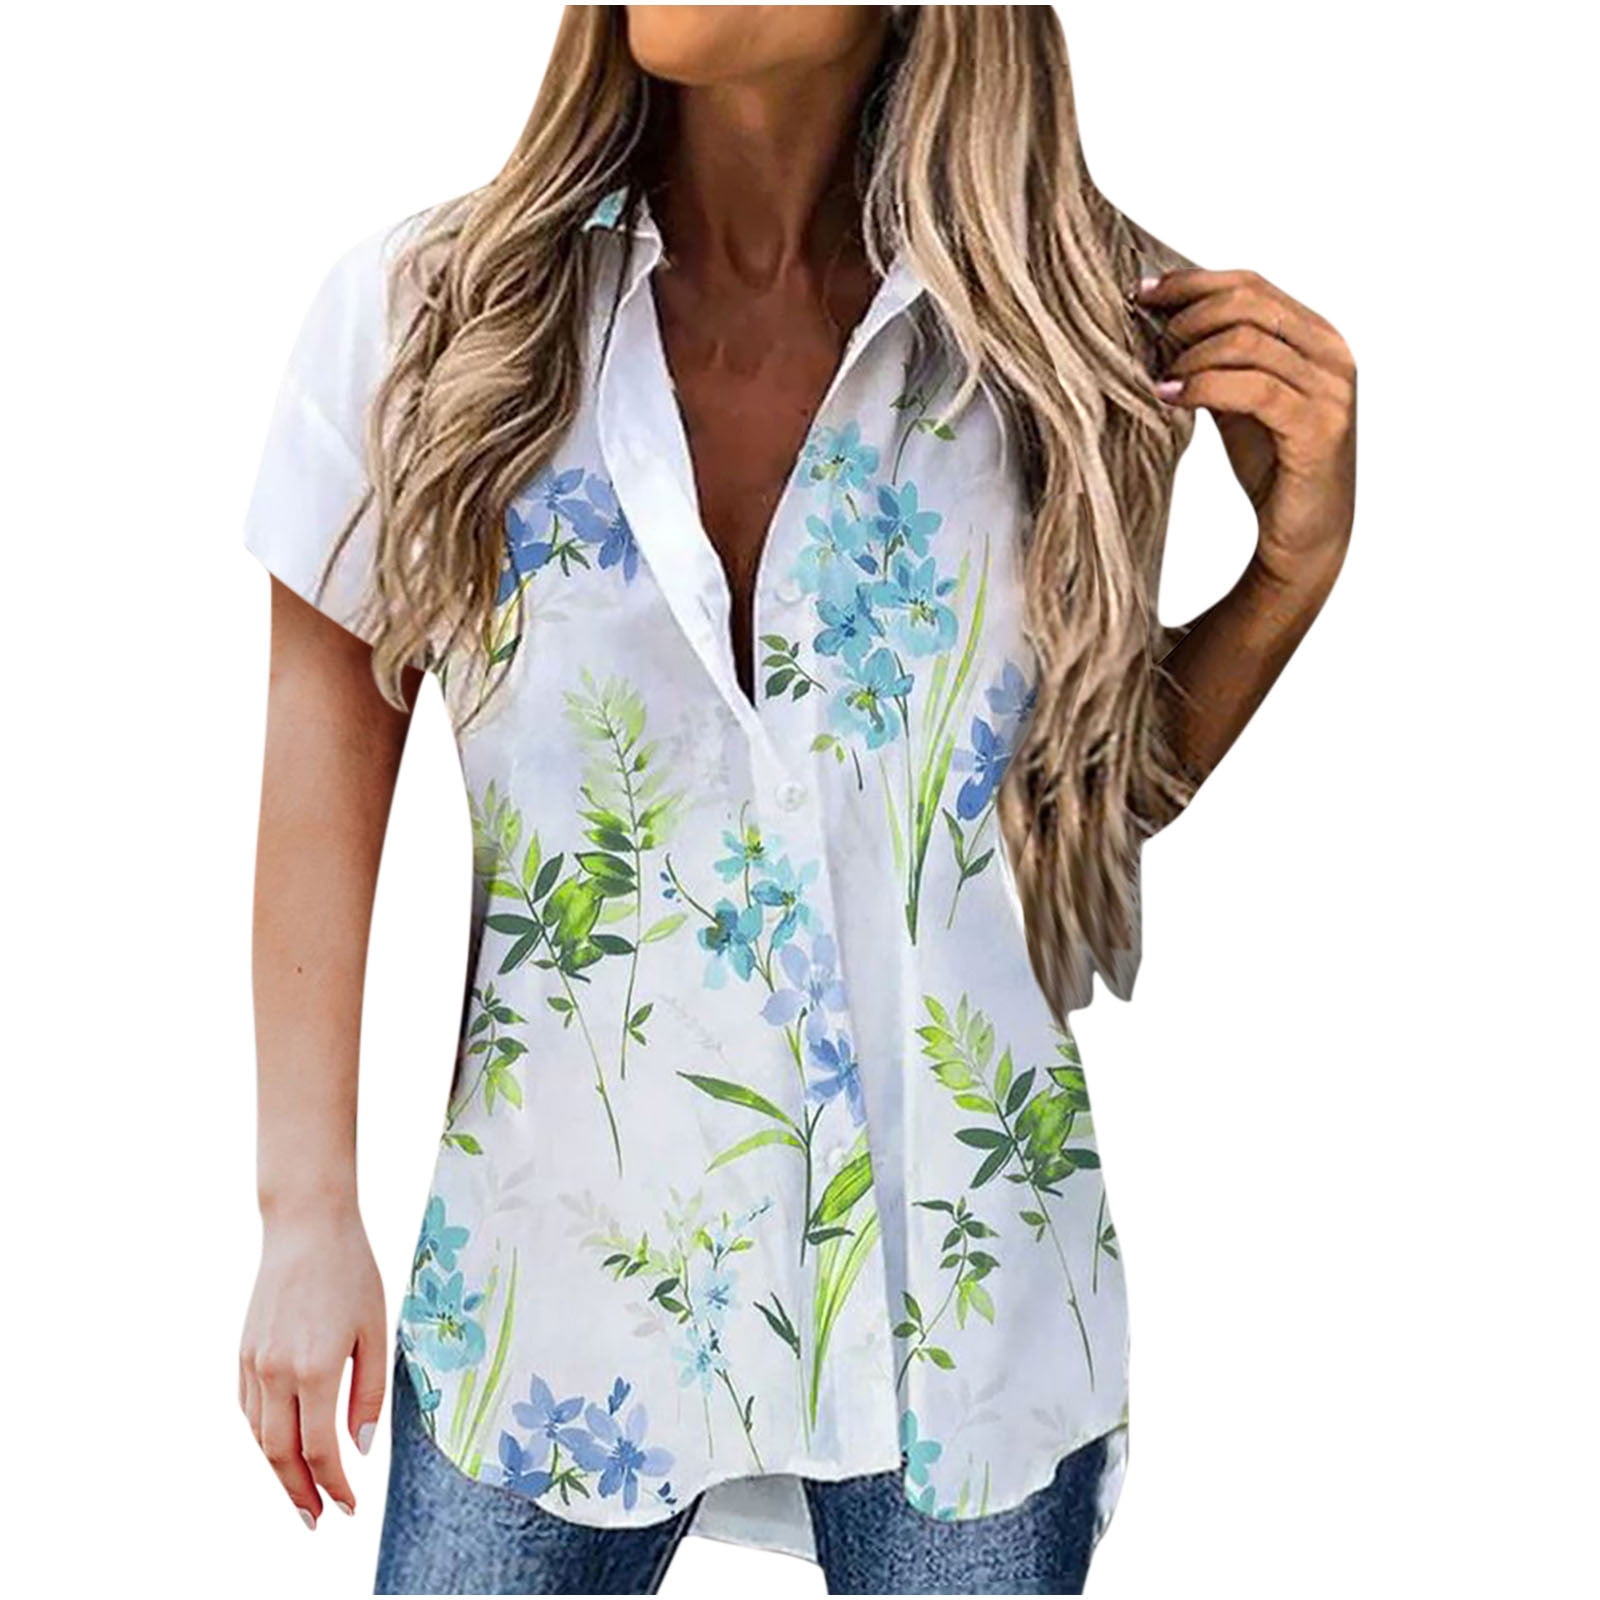 EASTHER Womens Cold Shoulder Floral Print Shirt Short Sleeve Casual Loose Tunic Tops 